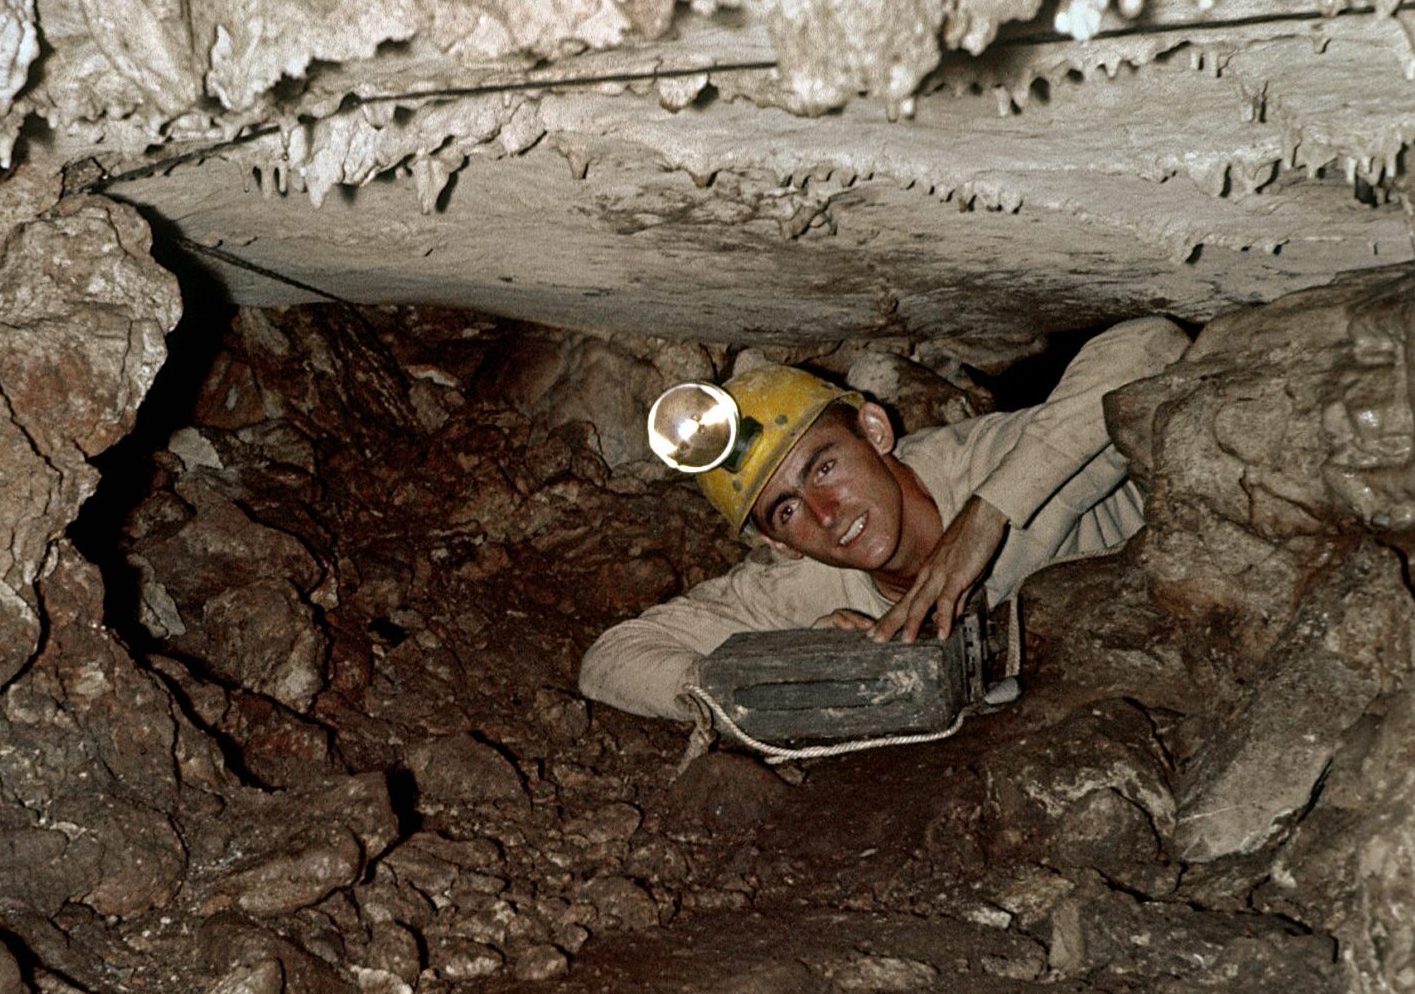 Orion Knox Jr., who helped discover Natural Bridge Caverns, dies at 81